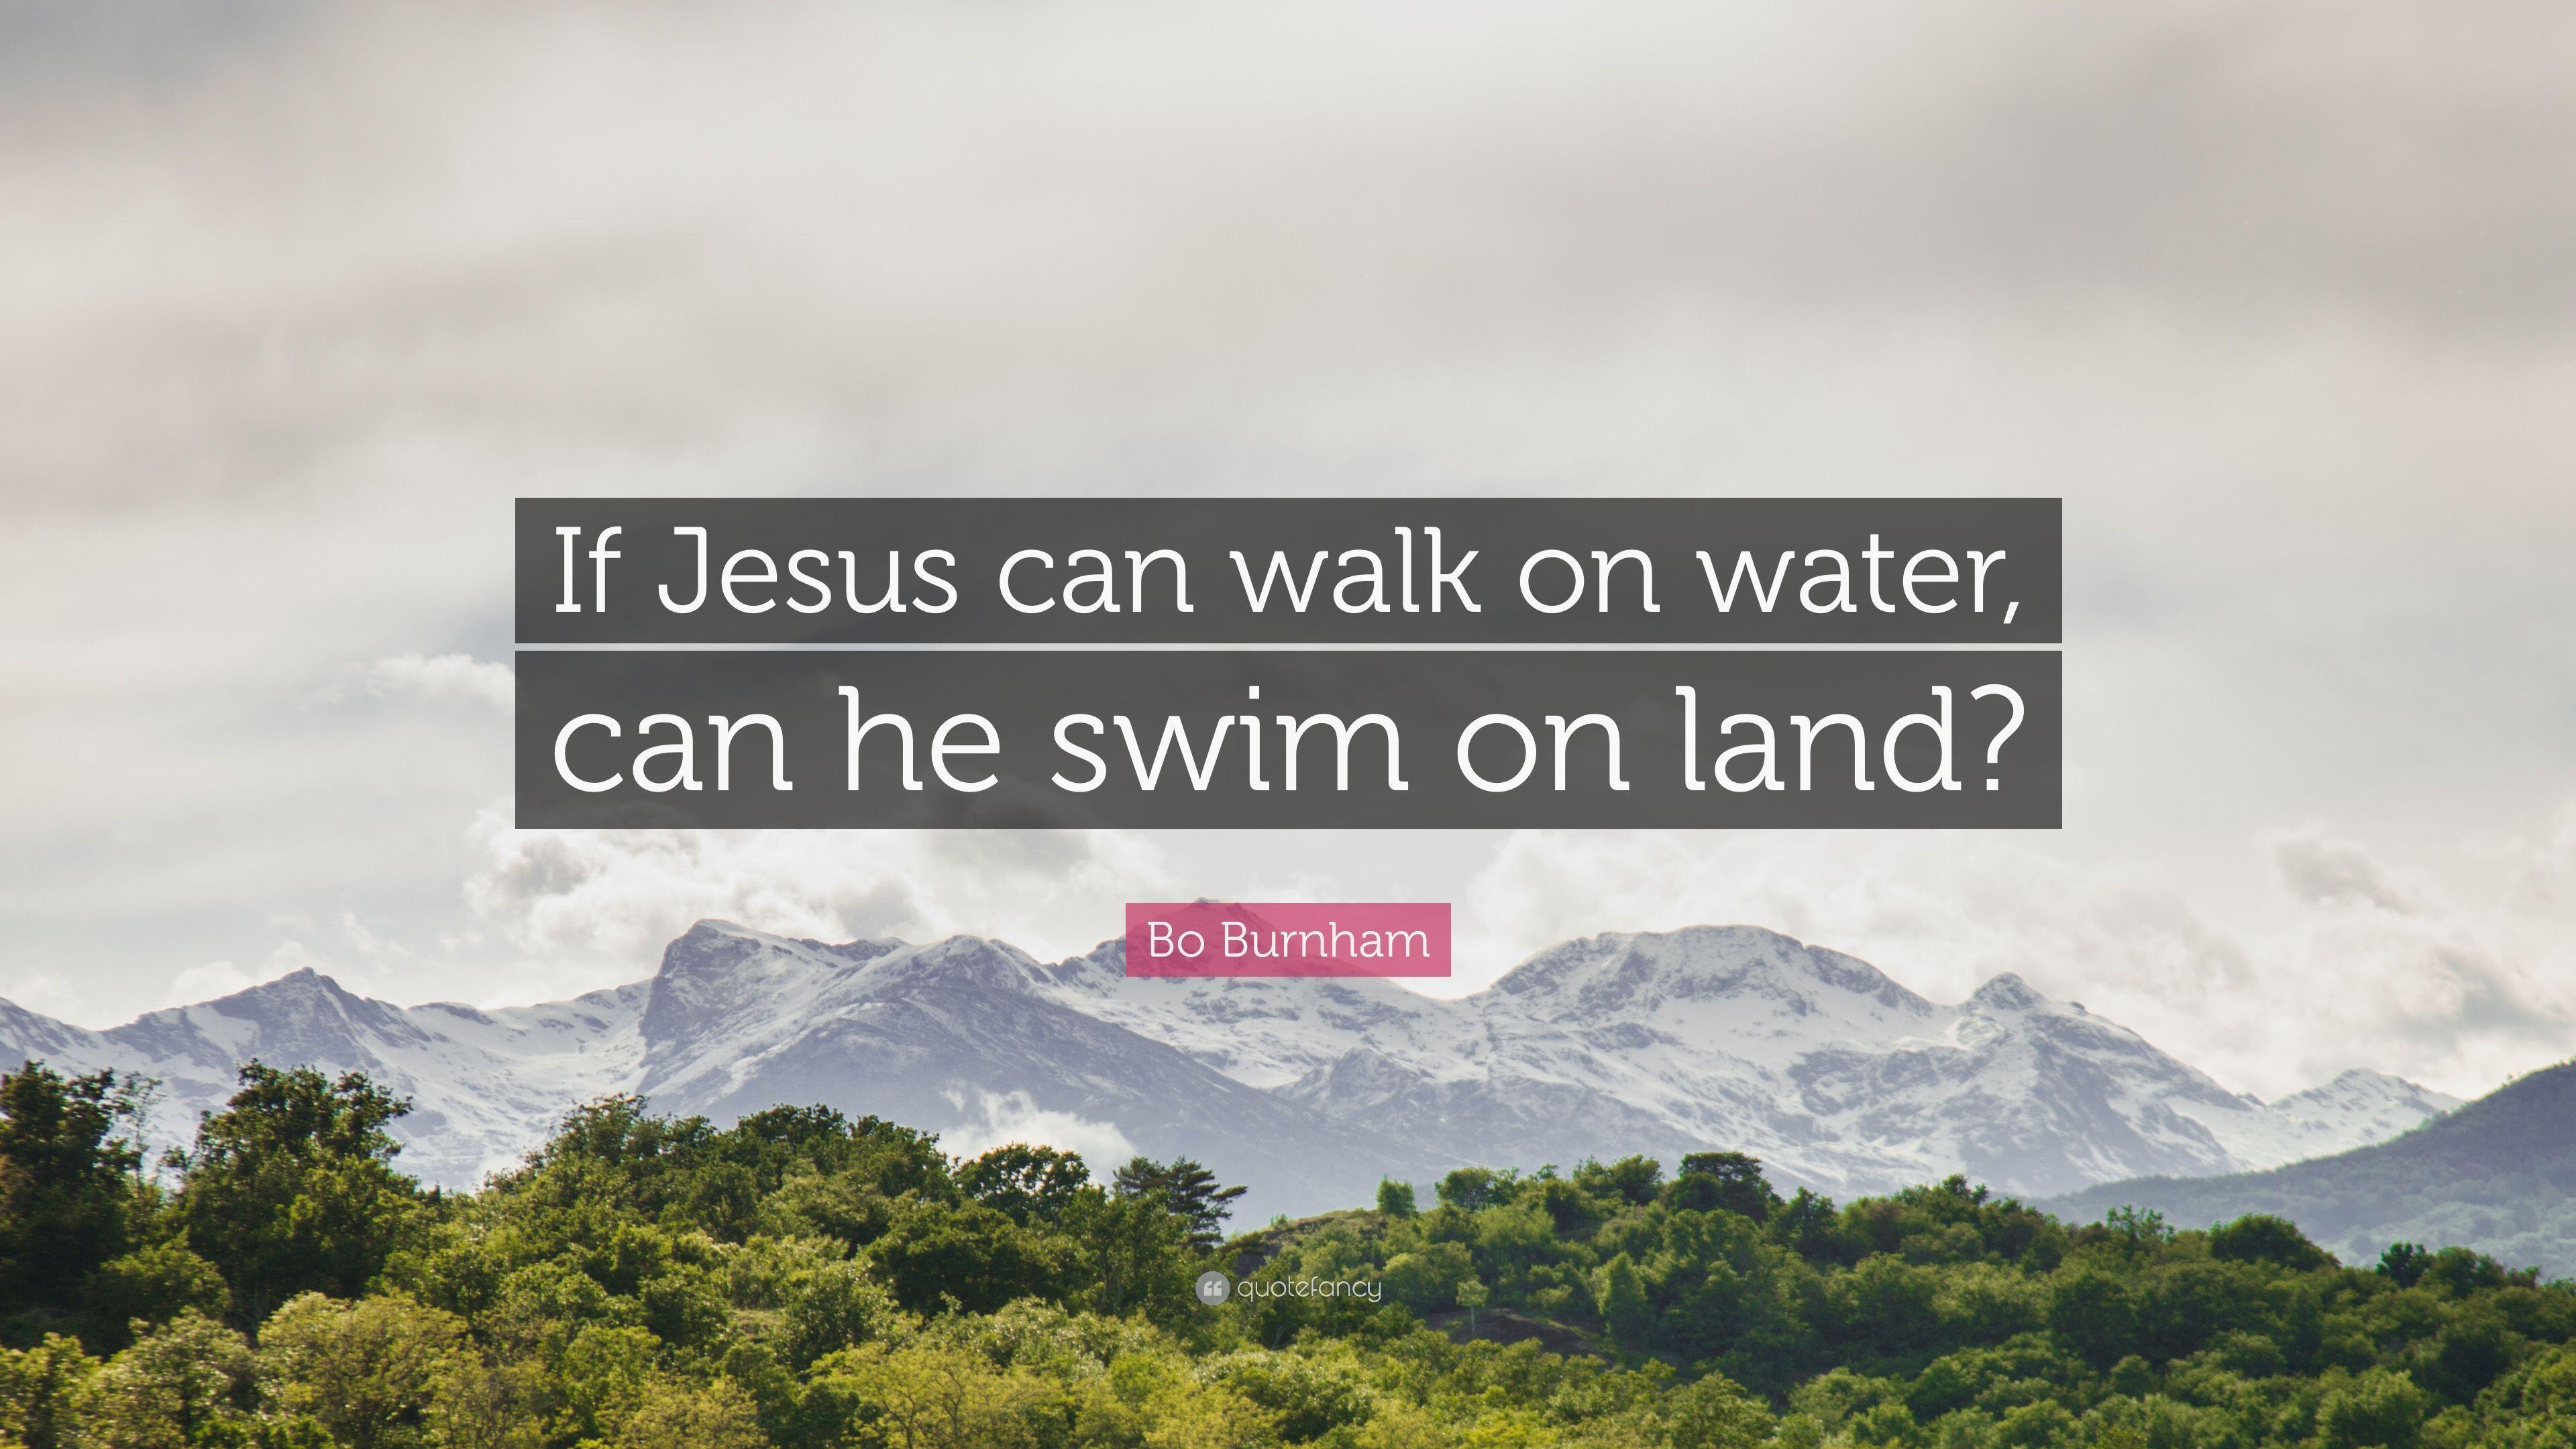 Bo Burnham Quote: “If Jesus can walk on water, can he swim on land